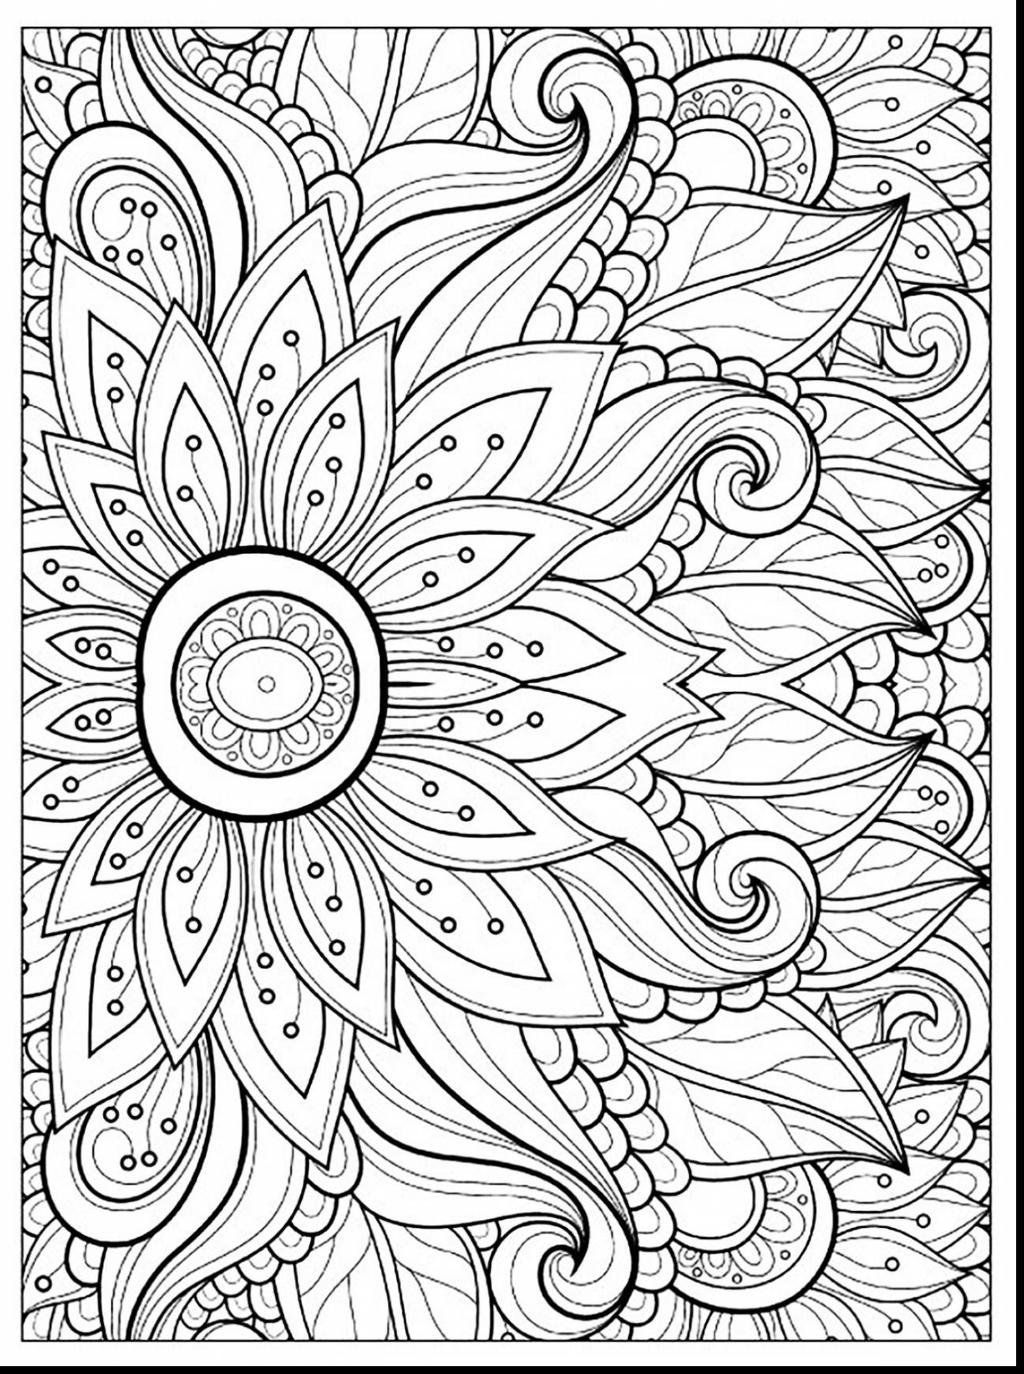 Free Mindfulness Coloring Pages Black And White printable